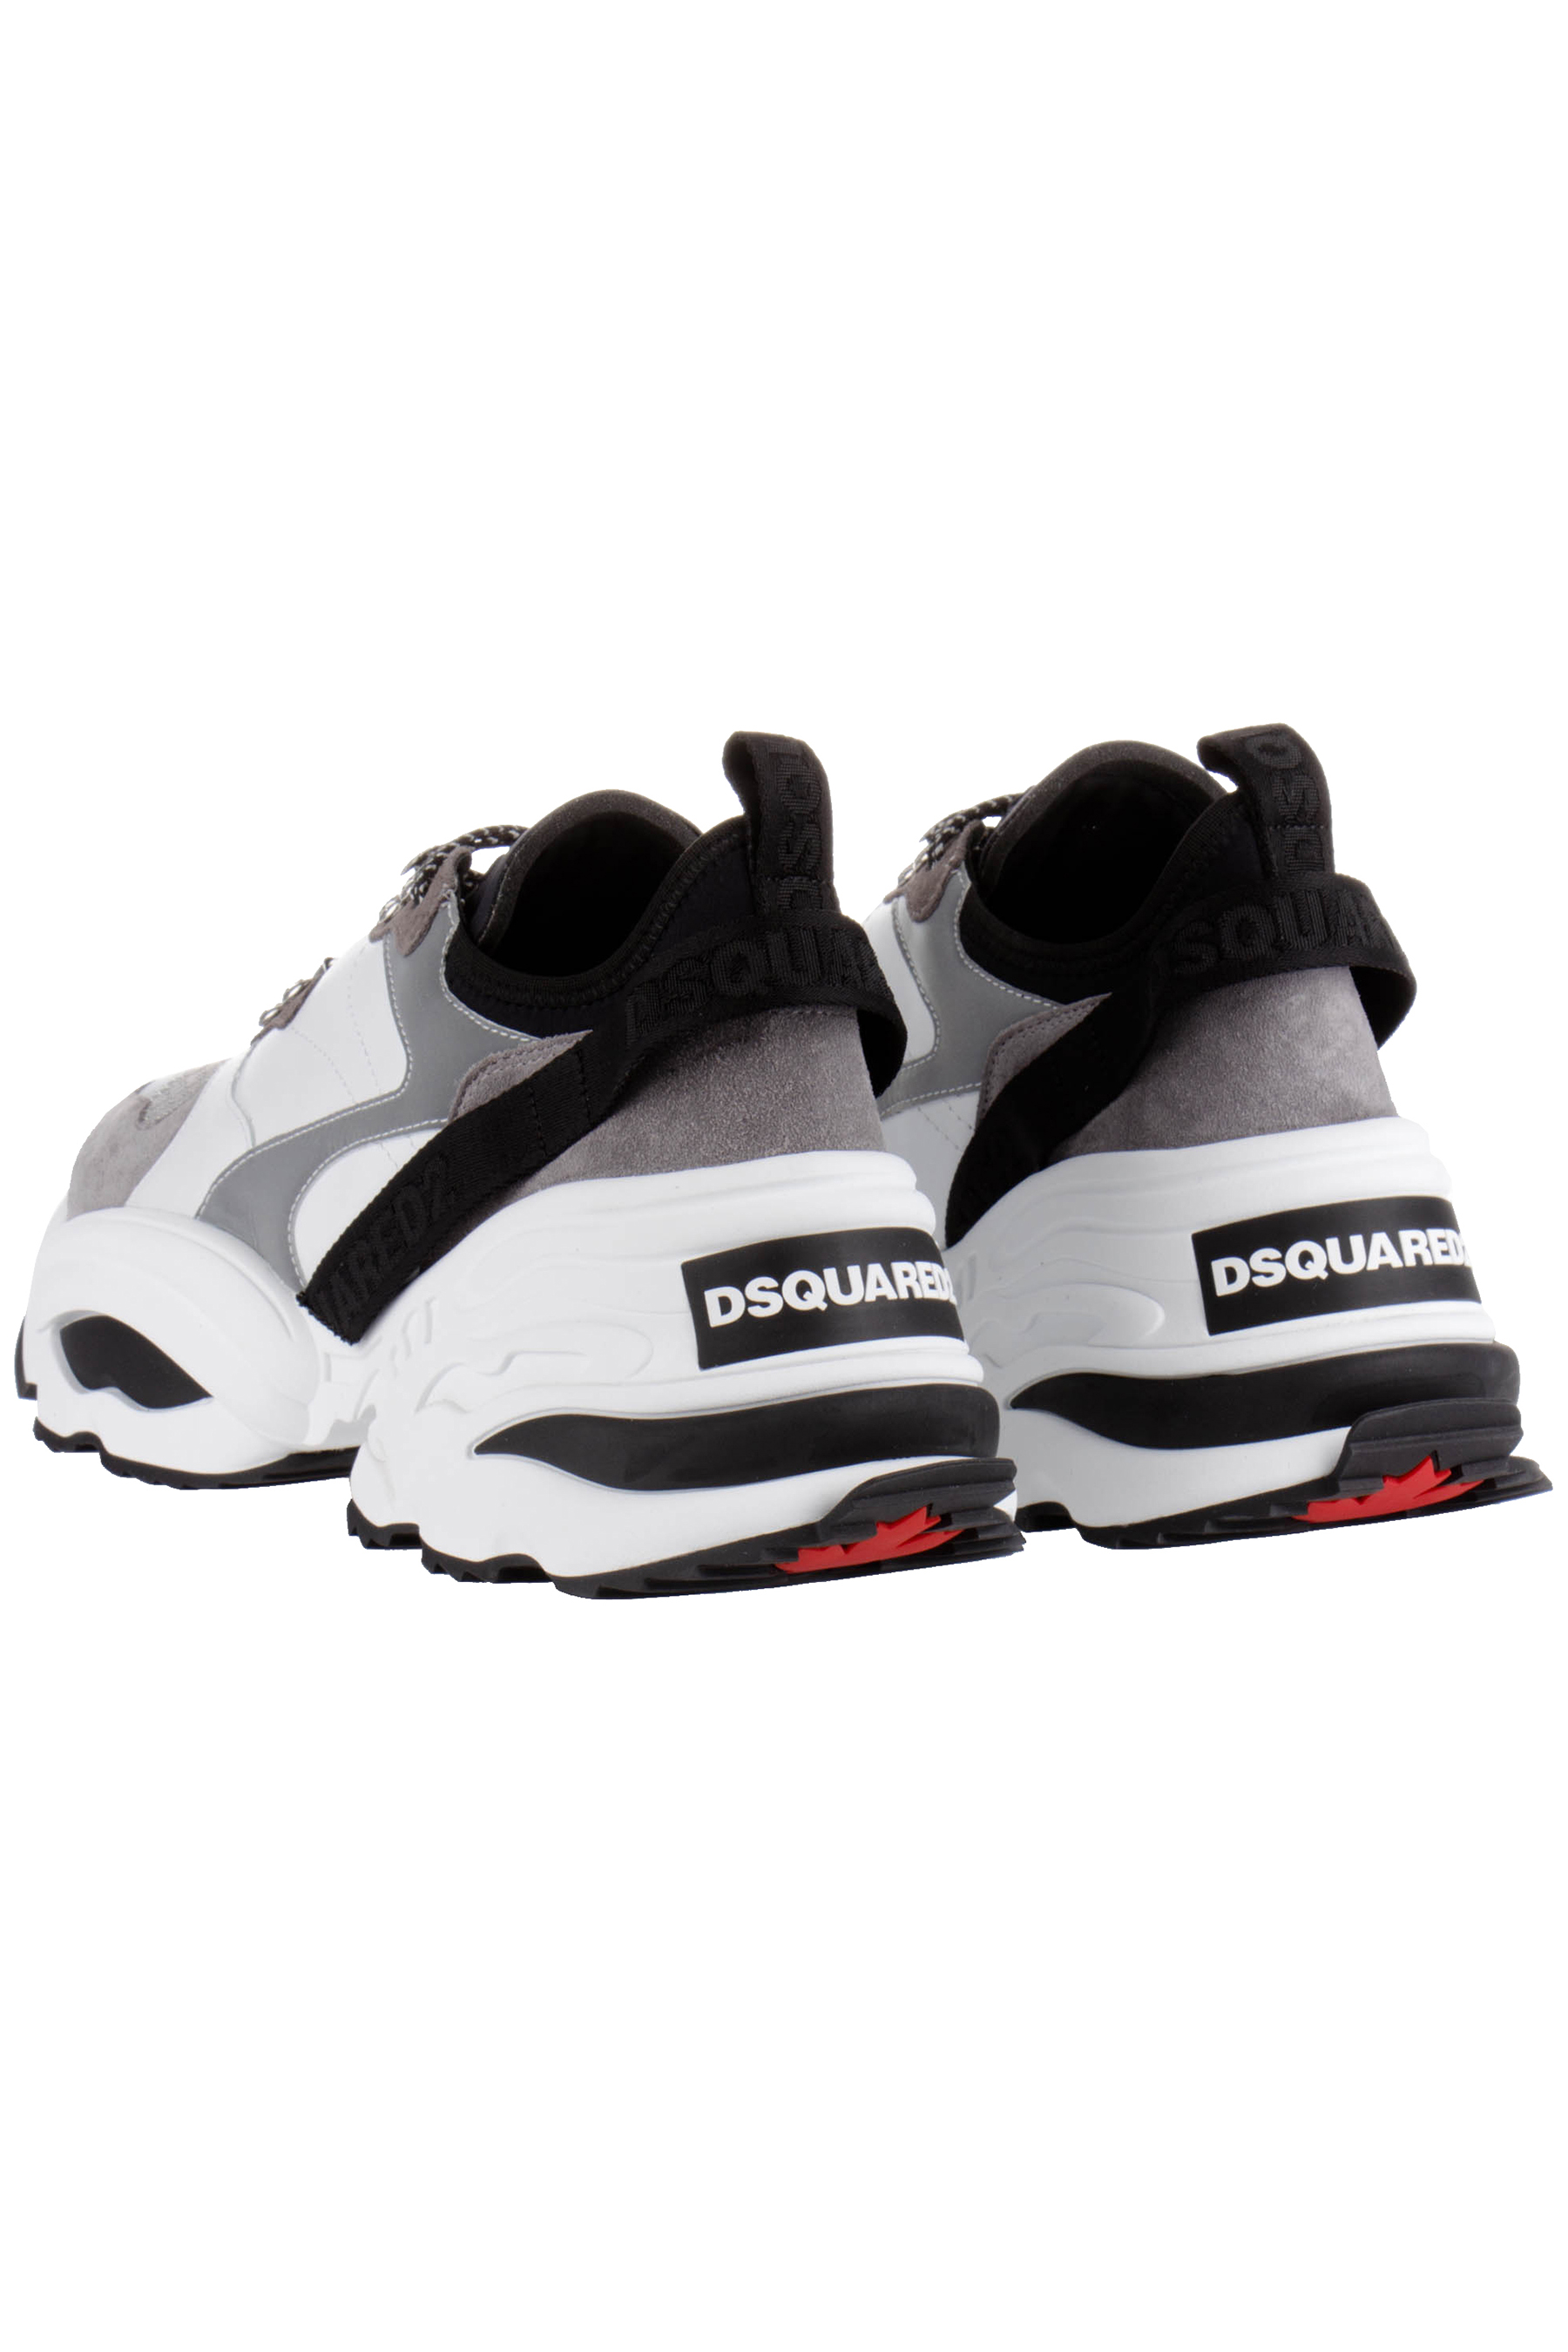 DSQUARED2 Sneakers The Giant K2 | Sneakers | Sneakers